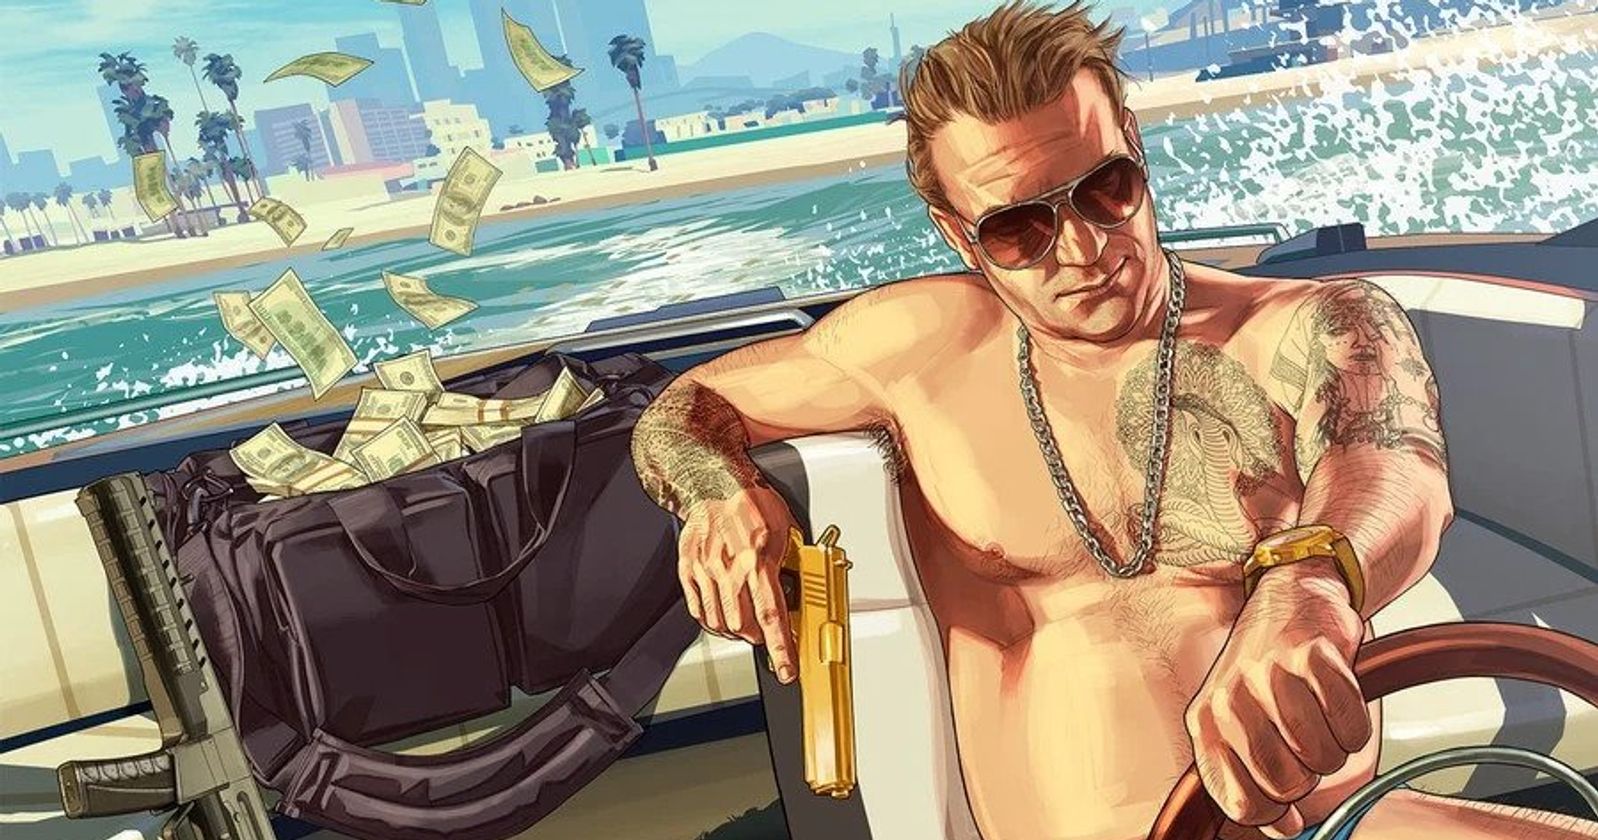 GTA Online Update Summer 2022: Next DLC Release Date, Leaks, and